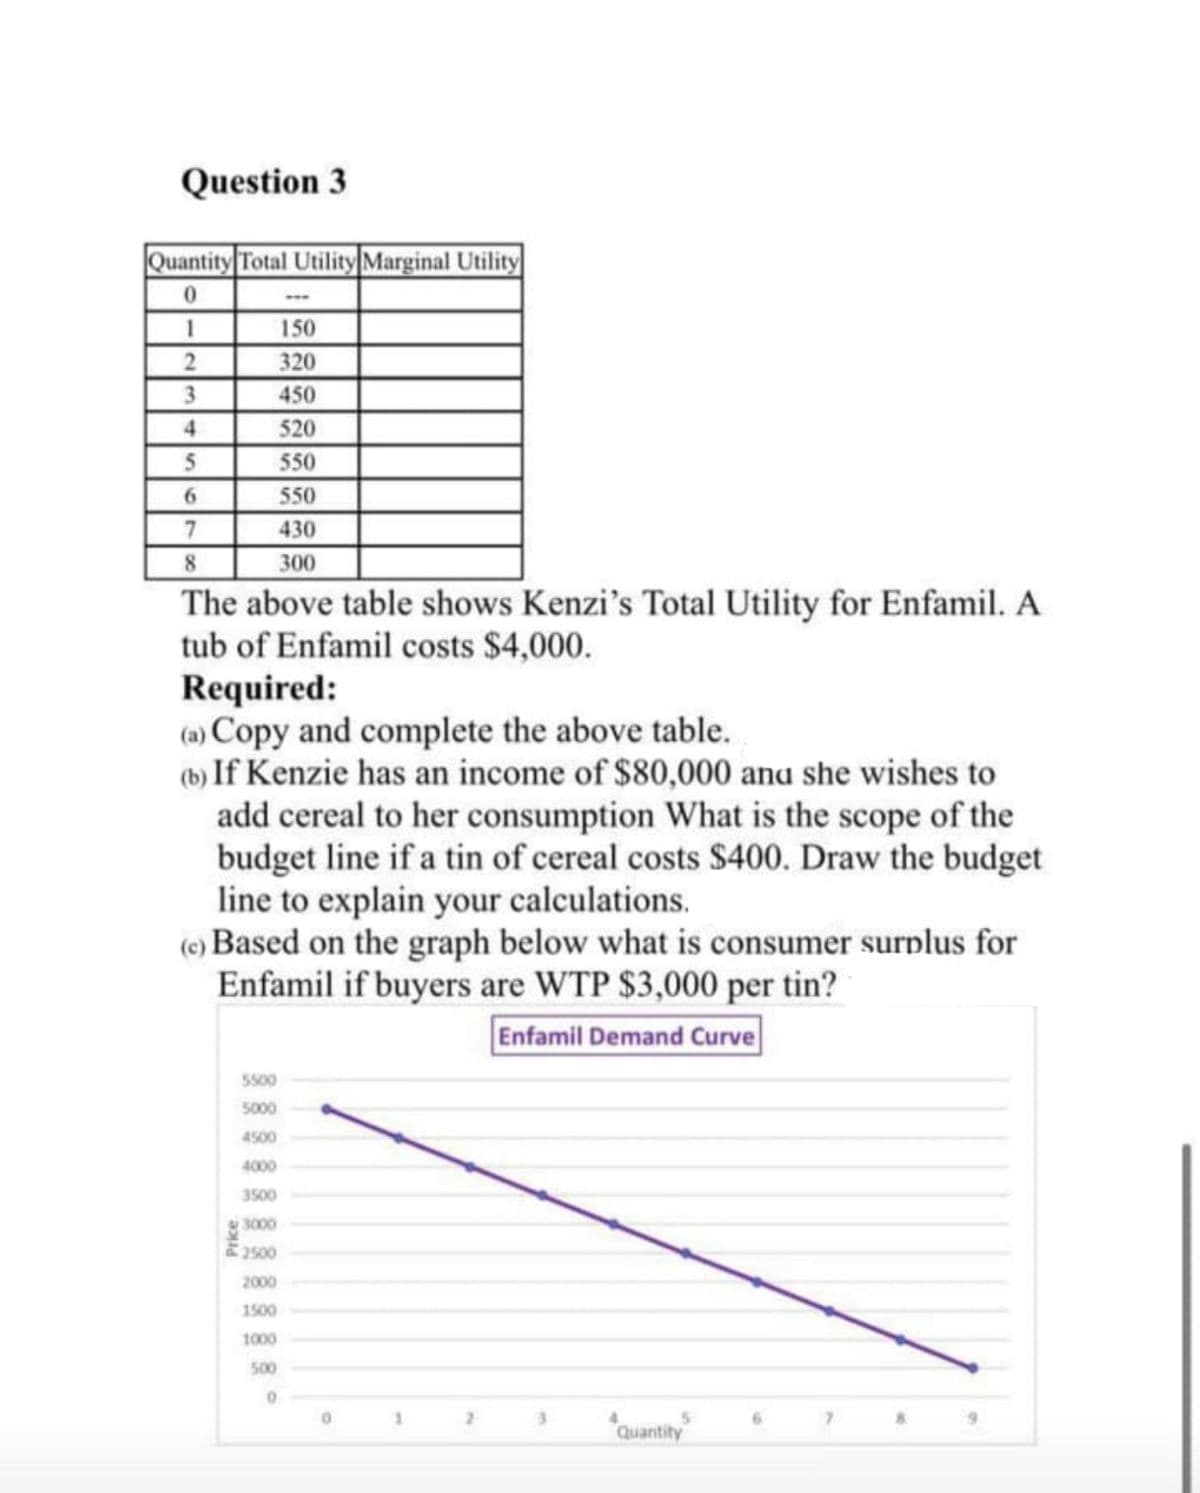 Question 3
Quantity Total Utility Marginal Utility
150
320
3.
450
4
520
550
6.
550
430
8.
300
The above table shows Kenzi's Total Utility for Enfamil. A
tub of Enfamil costs $4,000.
Required:
(a) Copy and complete the above table.
(b) If Kenzie has an income of $80,000 anu she wishes to
add cereal to her consumption What is the scope of the
budget line if a tin of cereal costs $400. Draw the budget
line to explain your calculations.
(e) Based on the graph below what is consumer surplus for
Enfamil if buyers are WTP $3,000 per tin?
Enfamil Demand Curve
5500
5000
4500
4000
3500
3000
2500
2000
1500
1000
500
5.
"quantity
